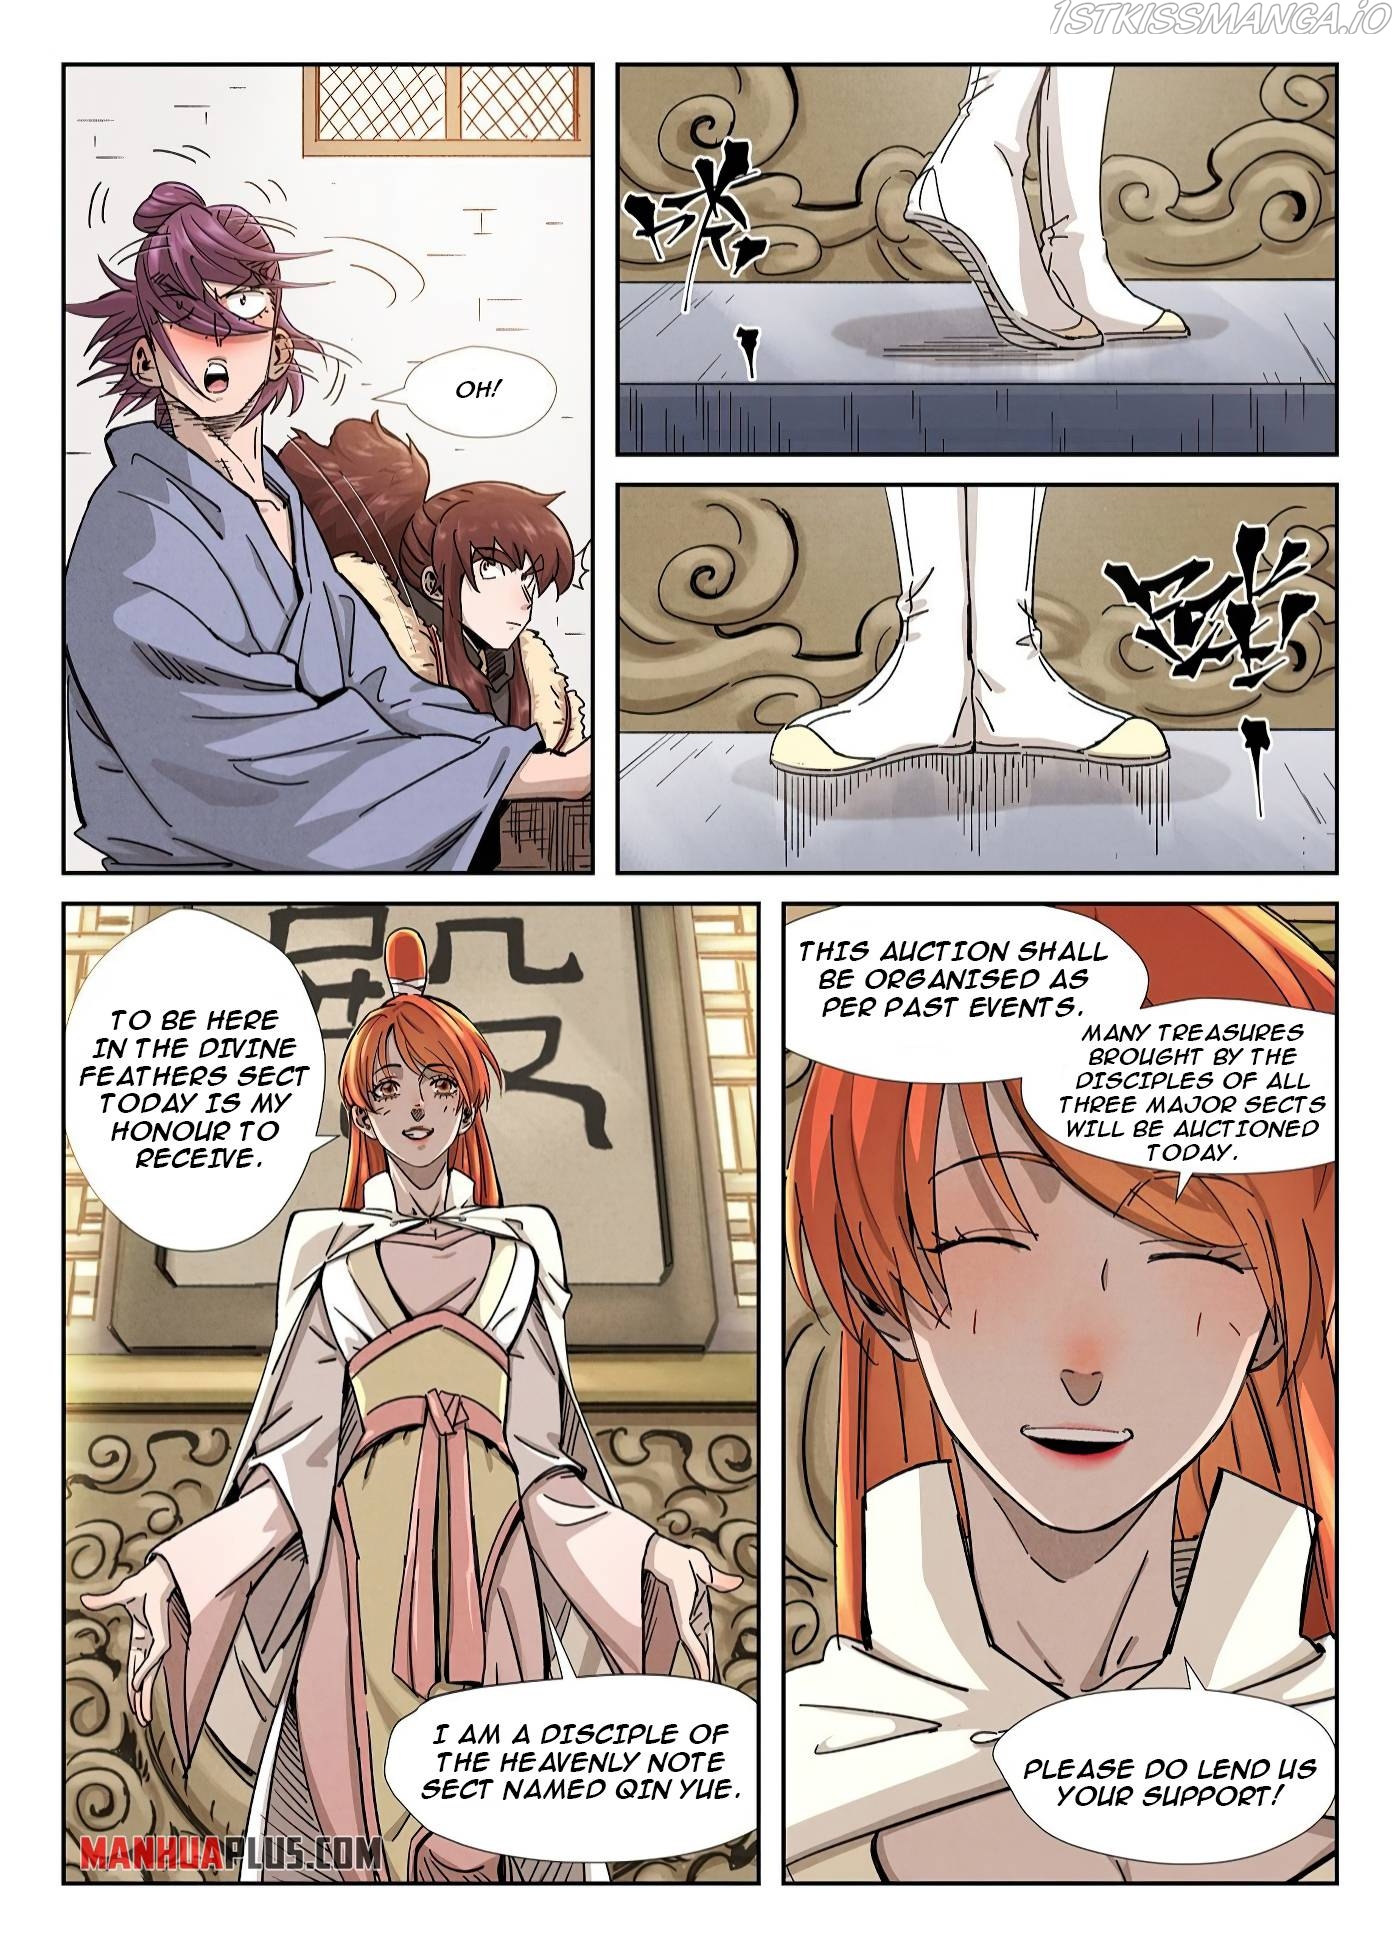 Tales of Demons and Gods Manhua Chapter 336.1 - Page 5